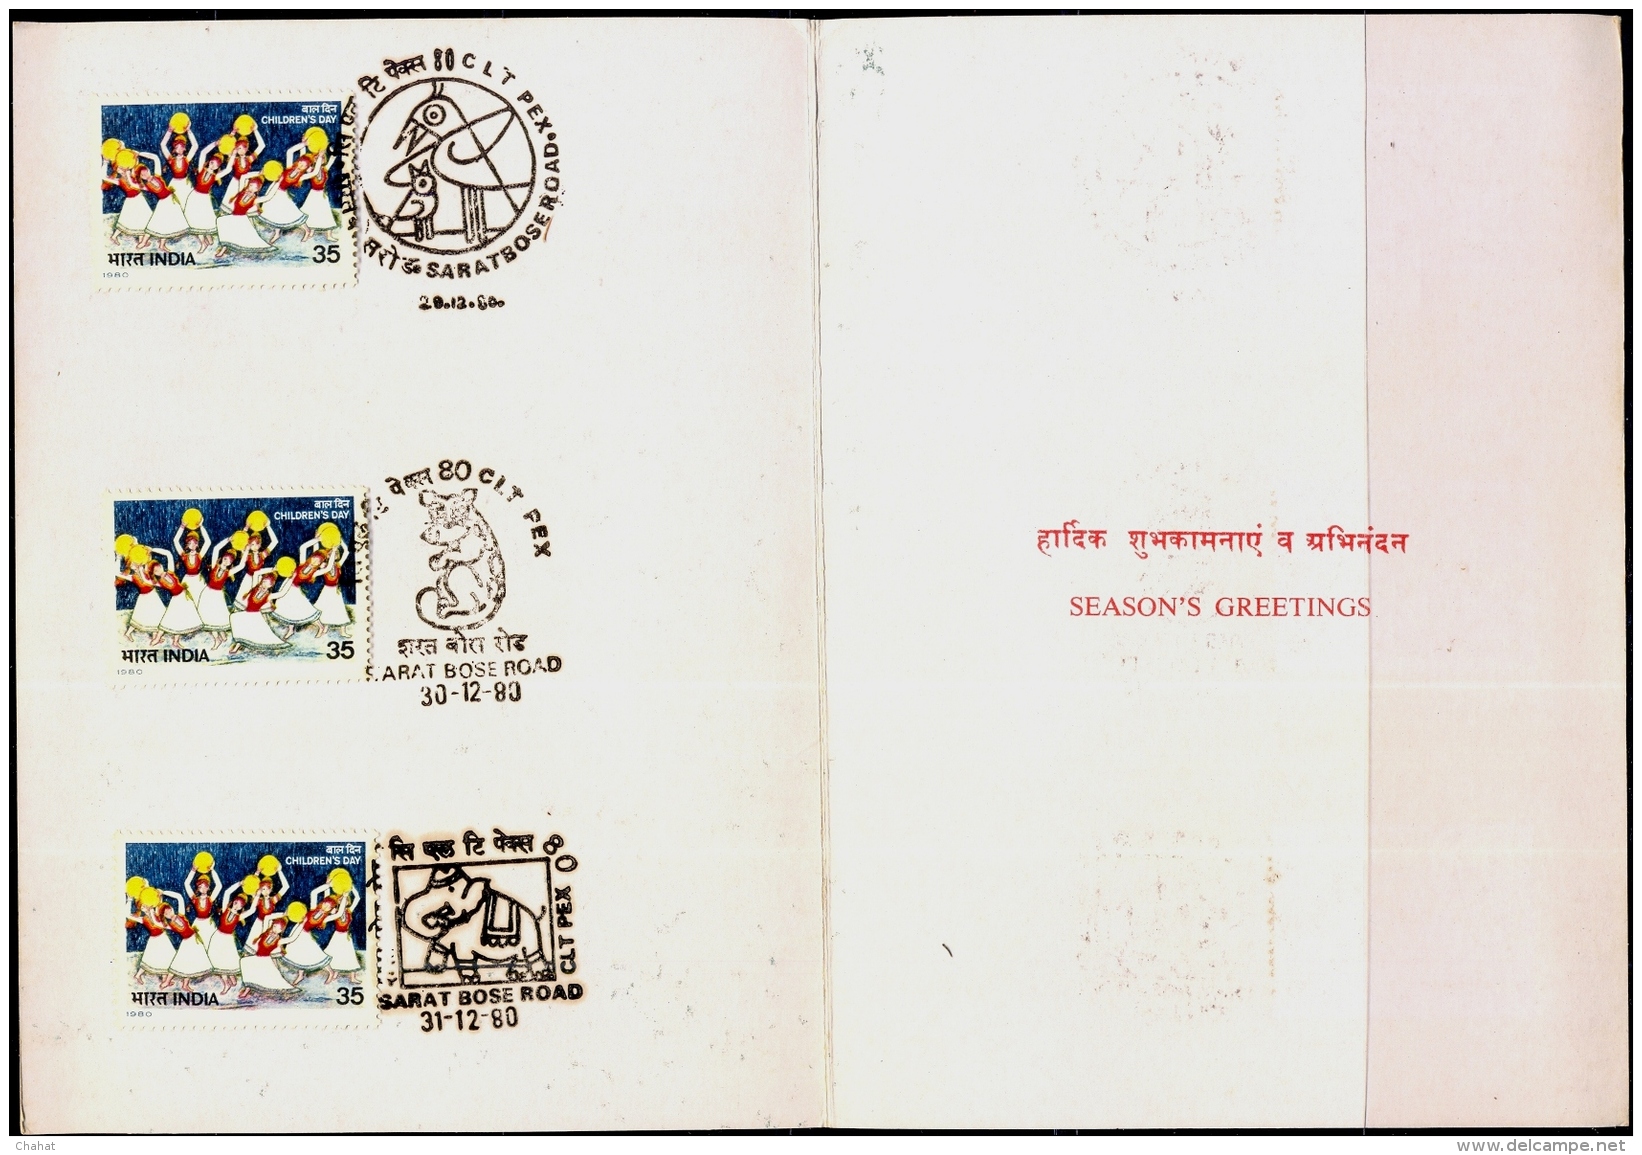 CHILDRENS DAY-1980-INDIA POSTAGE GREETING CARD WITH EVENT CANCELLATIONS &amp; BOOKLET-ERROR-EXTREMELY SCARCE-MNH-M-159 - Errors, Freaks & Oddities (EFO)